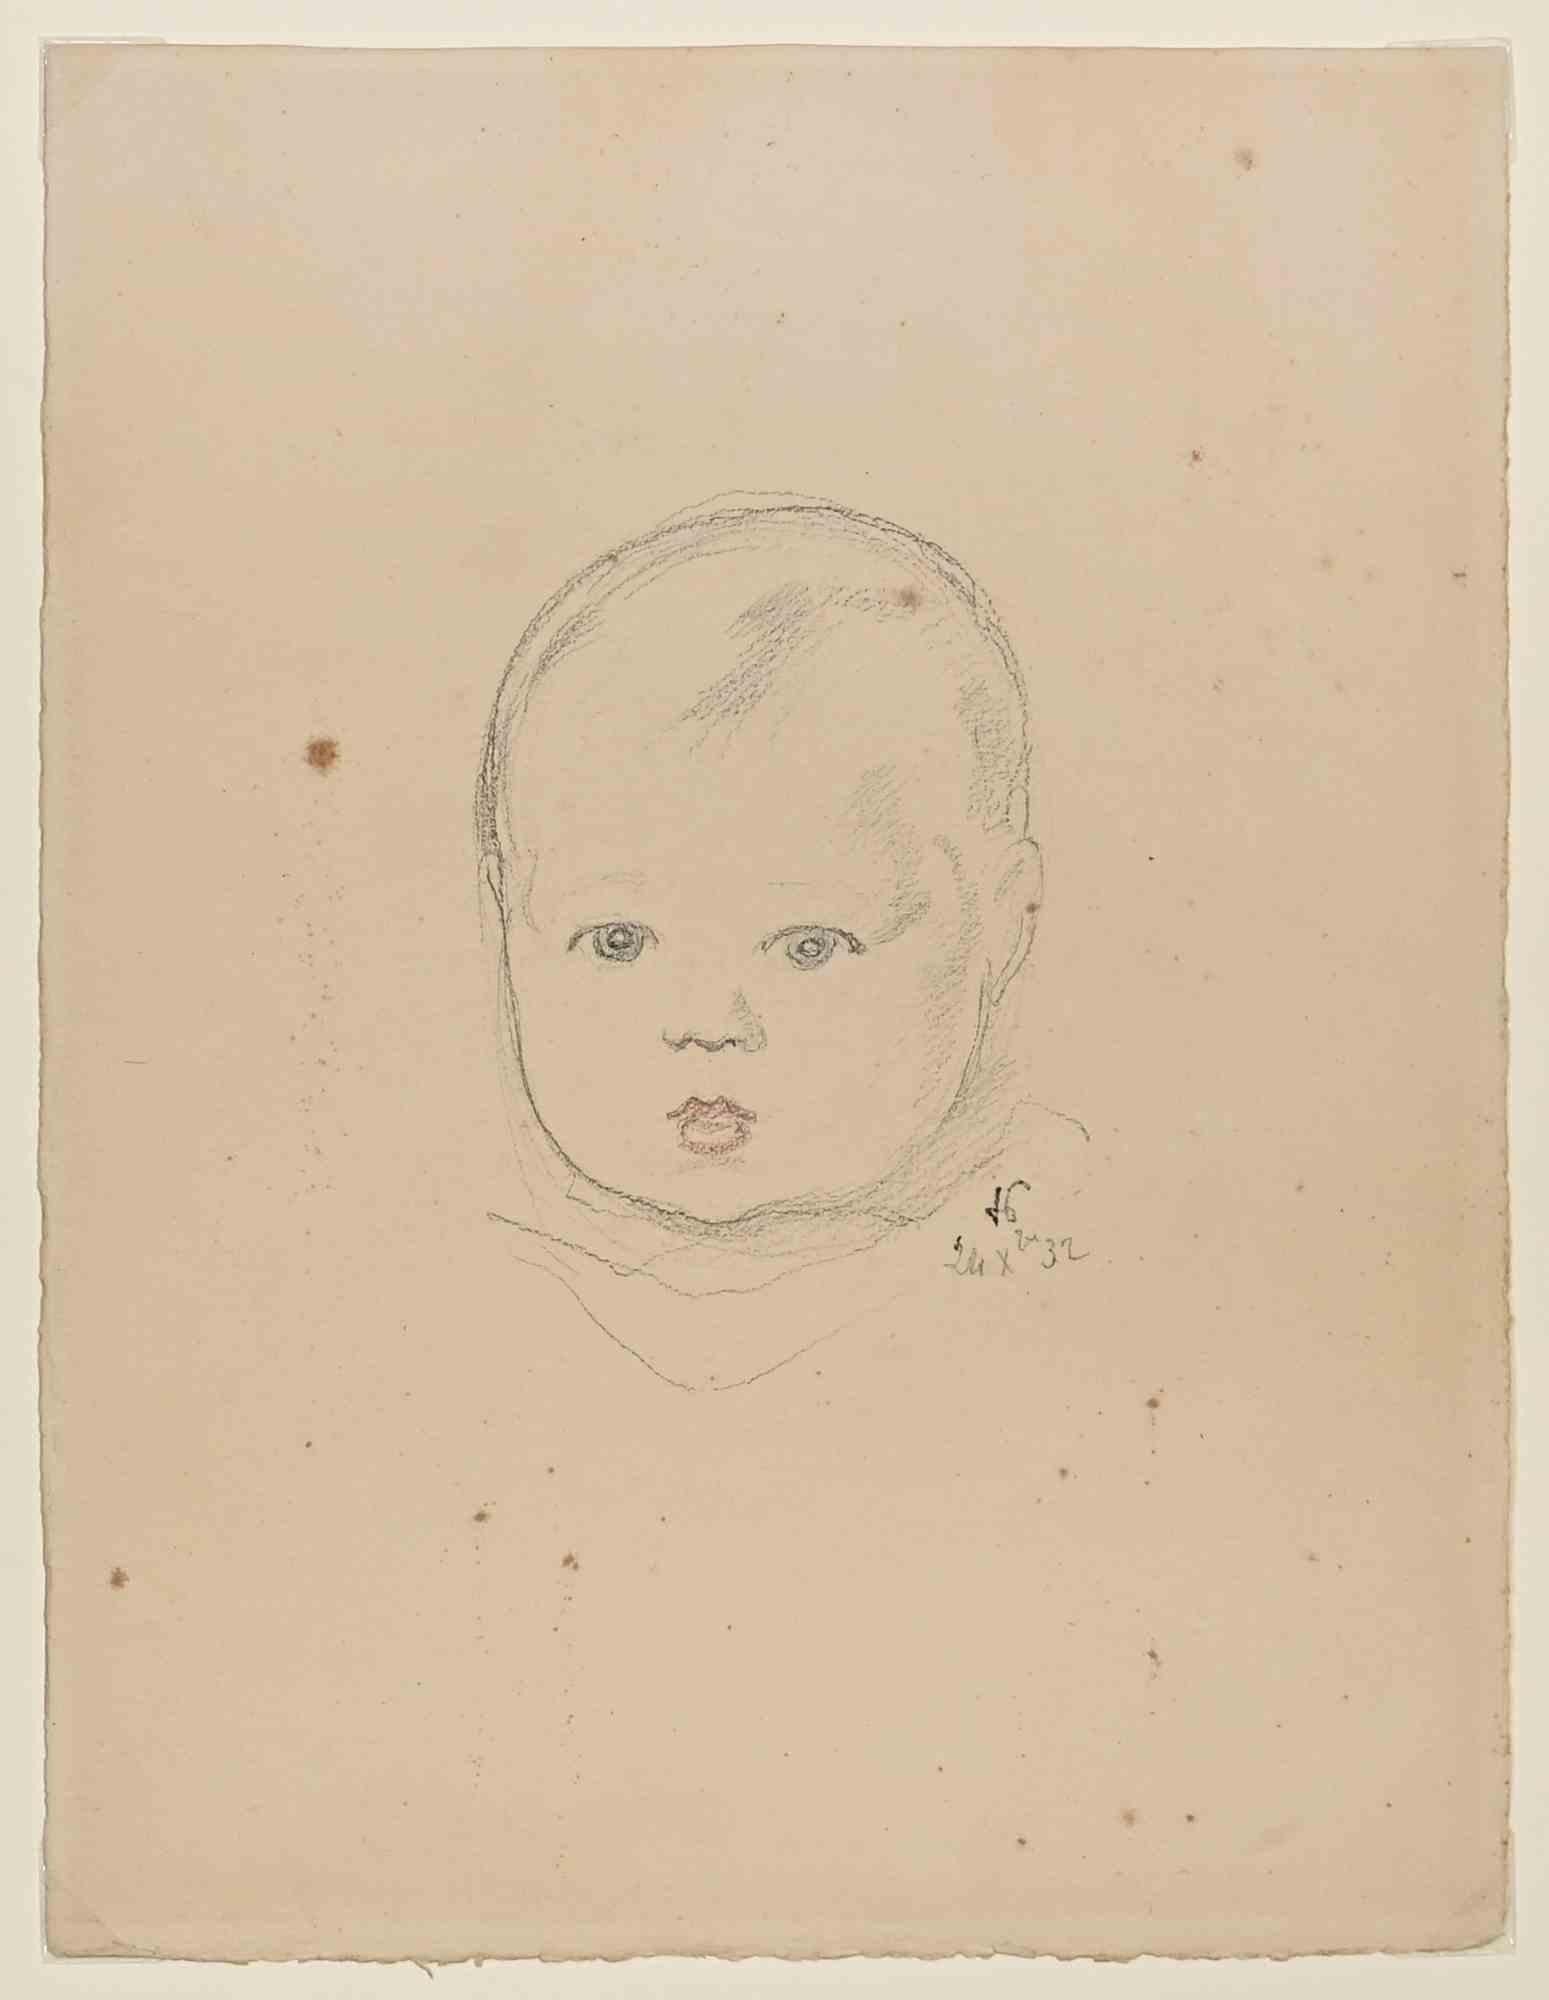 Child - Drawing by Hermann Paul - Early 20th Century